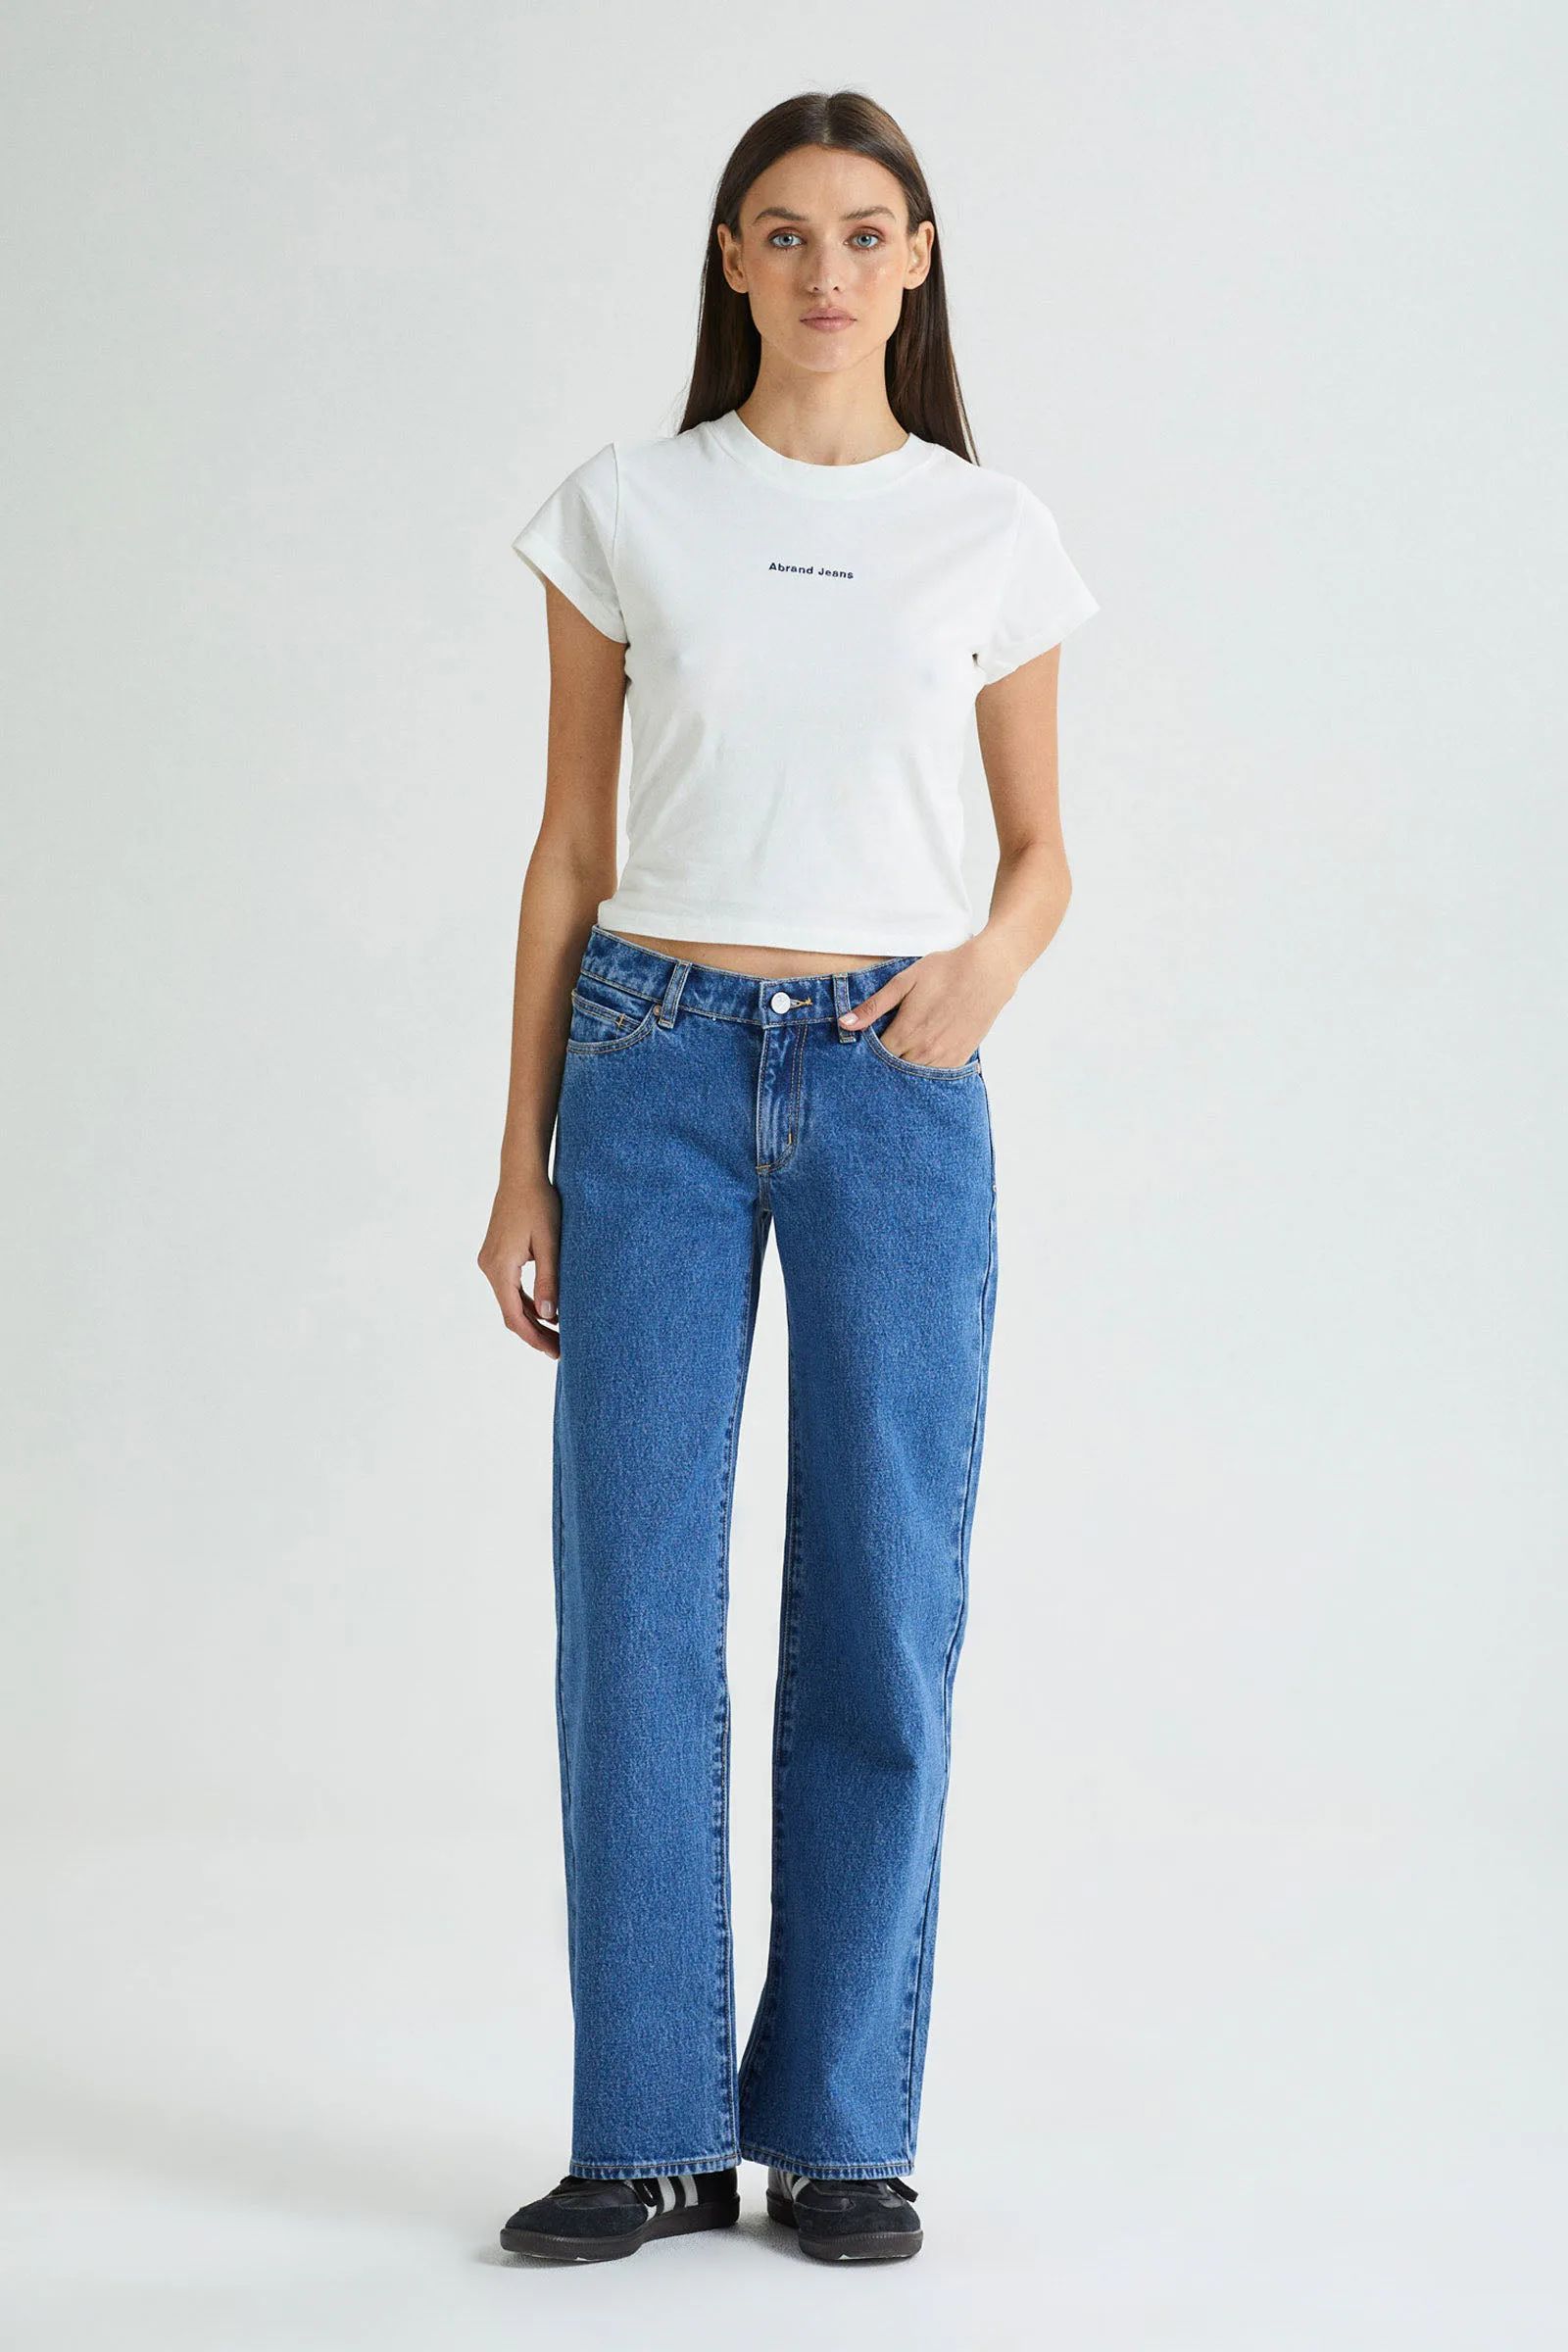 99 Low & Wide Chantell Organic | Abrand Jeans US